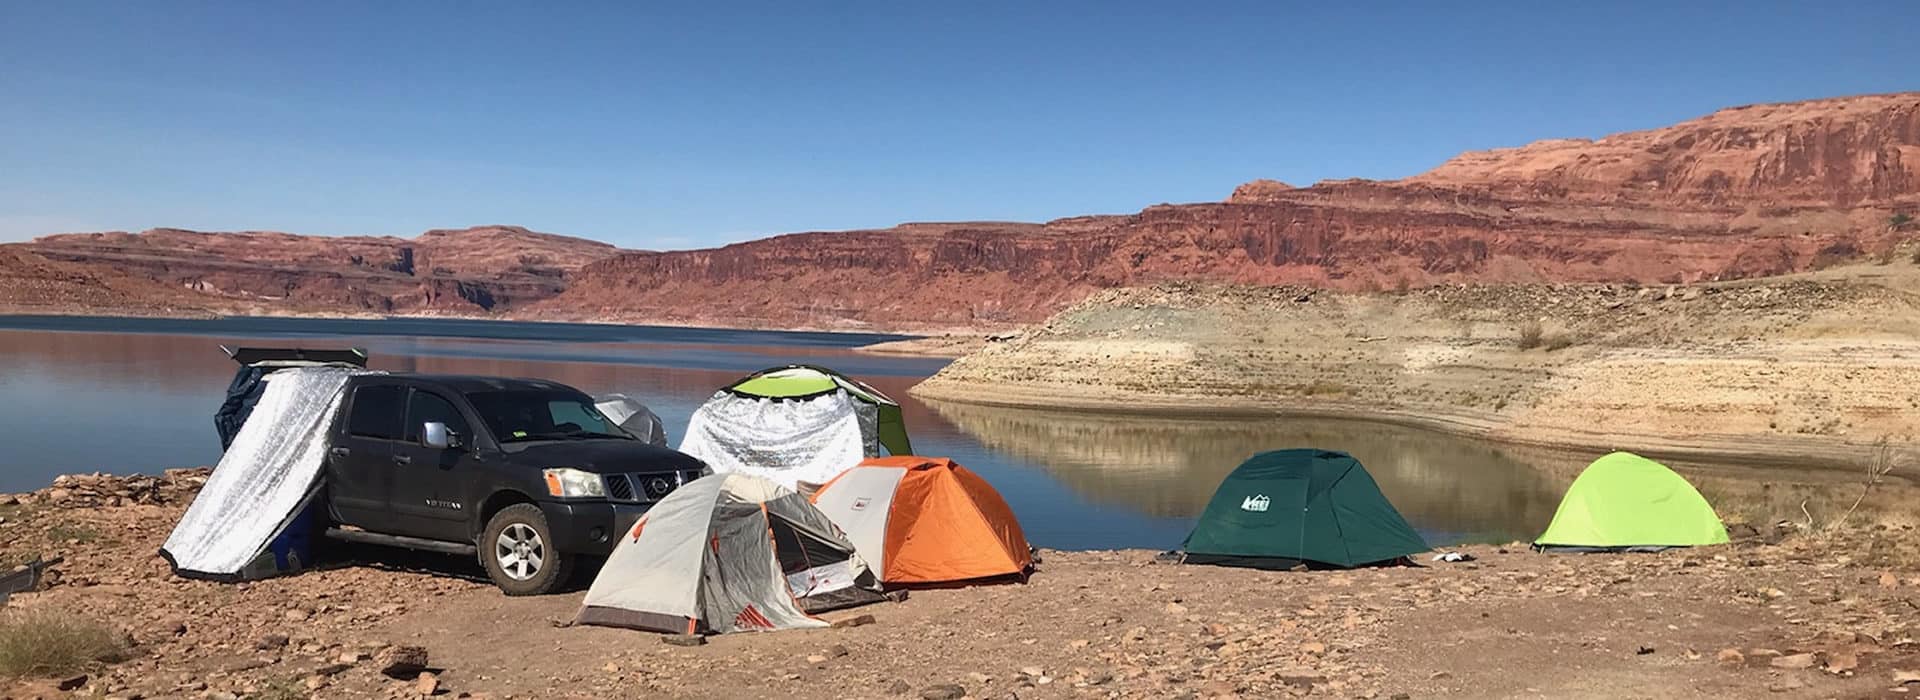 Tents on Beach at North End of Lake Powell